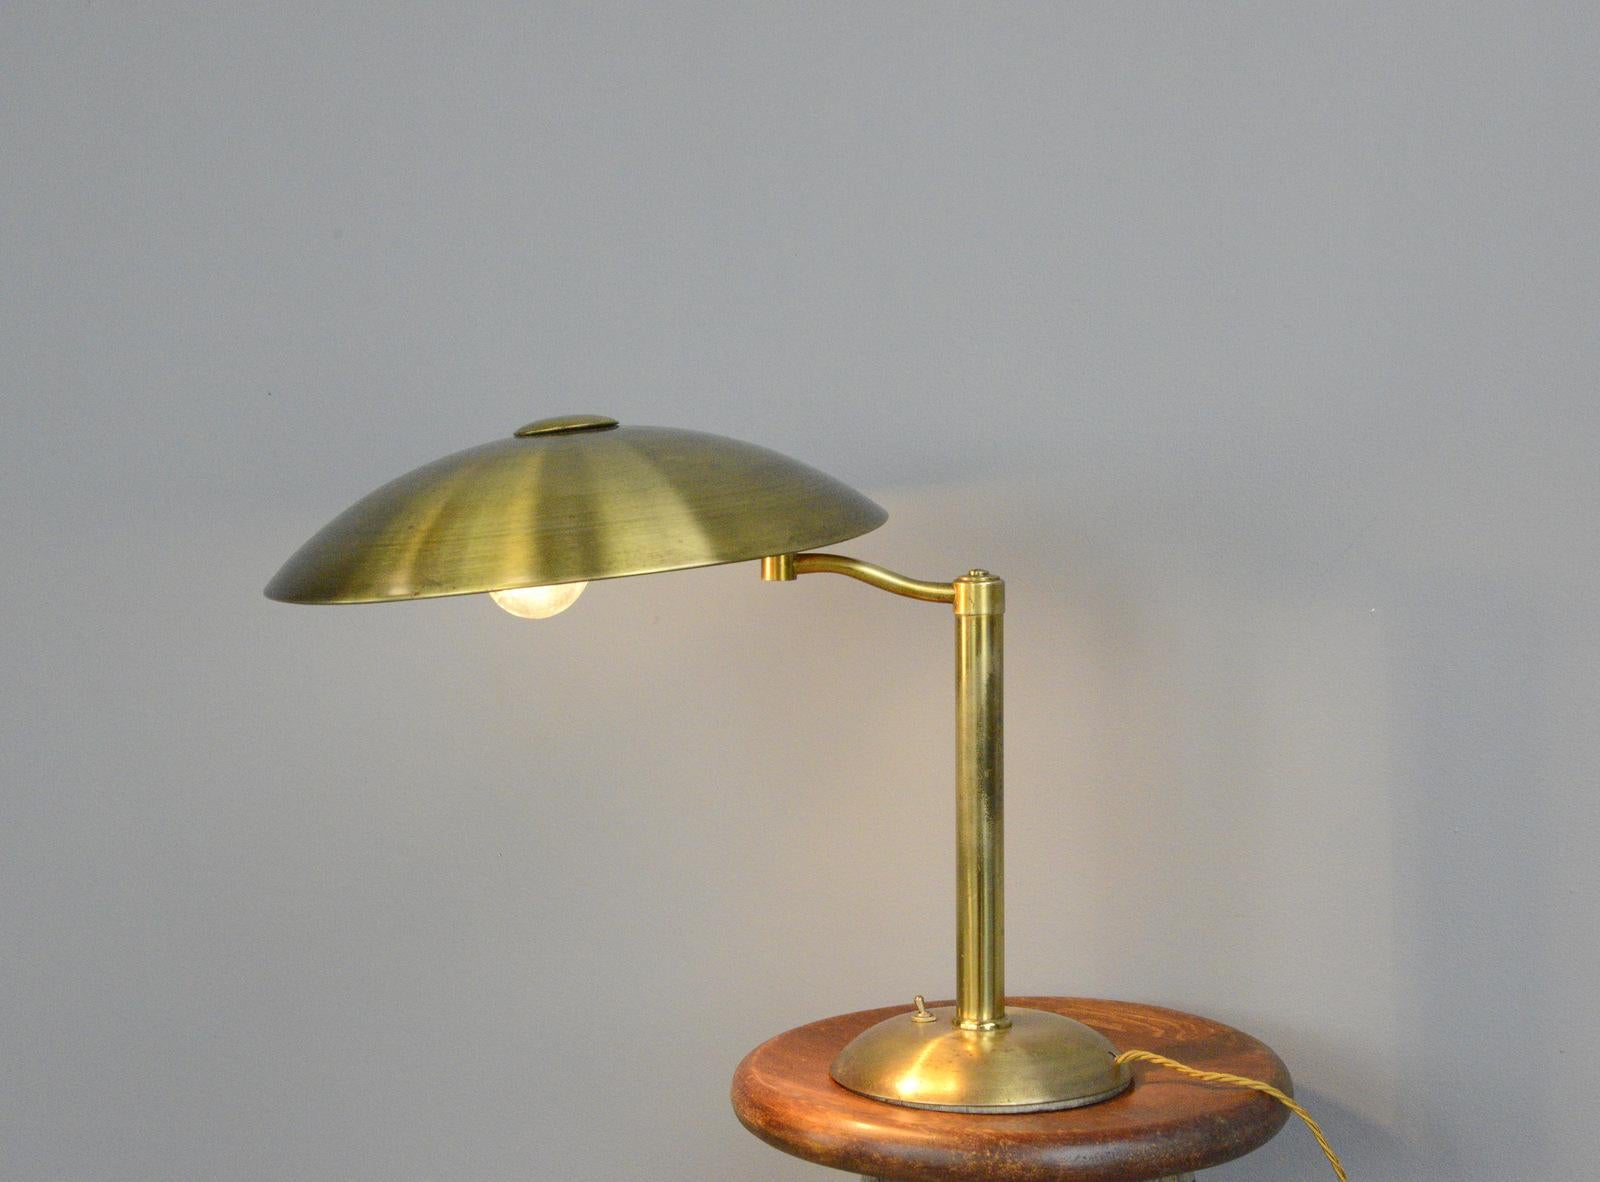 Swing arm brass table lamp by Hillebrand circa 1930s

- Solid brass
- On/Off toggle switch on the base
- Takes E27 fitting bulbs
- Swing out arm
- Designed by Egon Hillebrand and stamped with his initials on the cast iron base
- Produced by